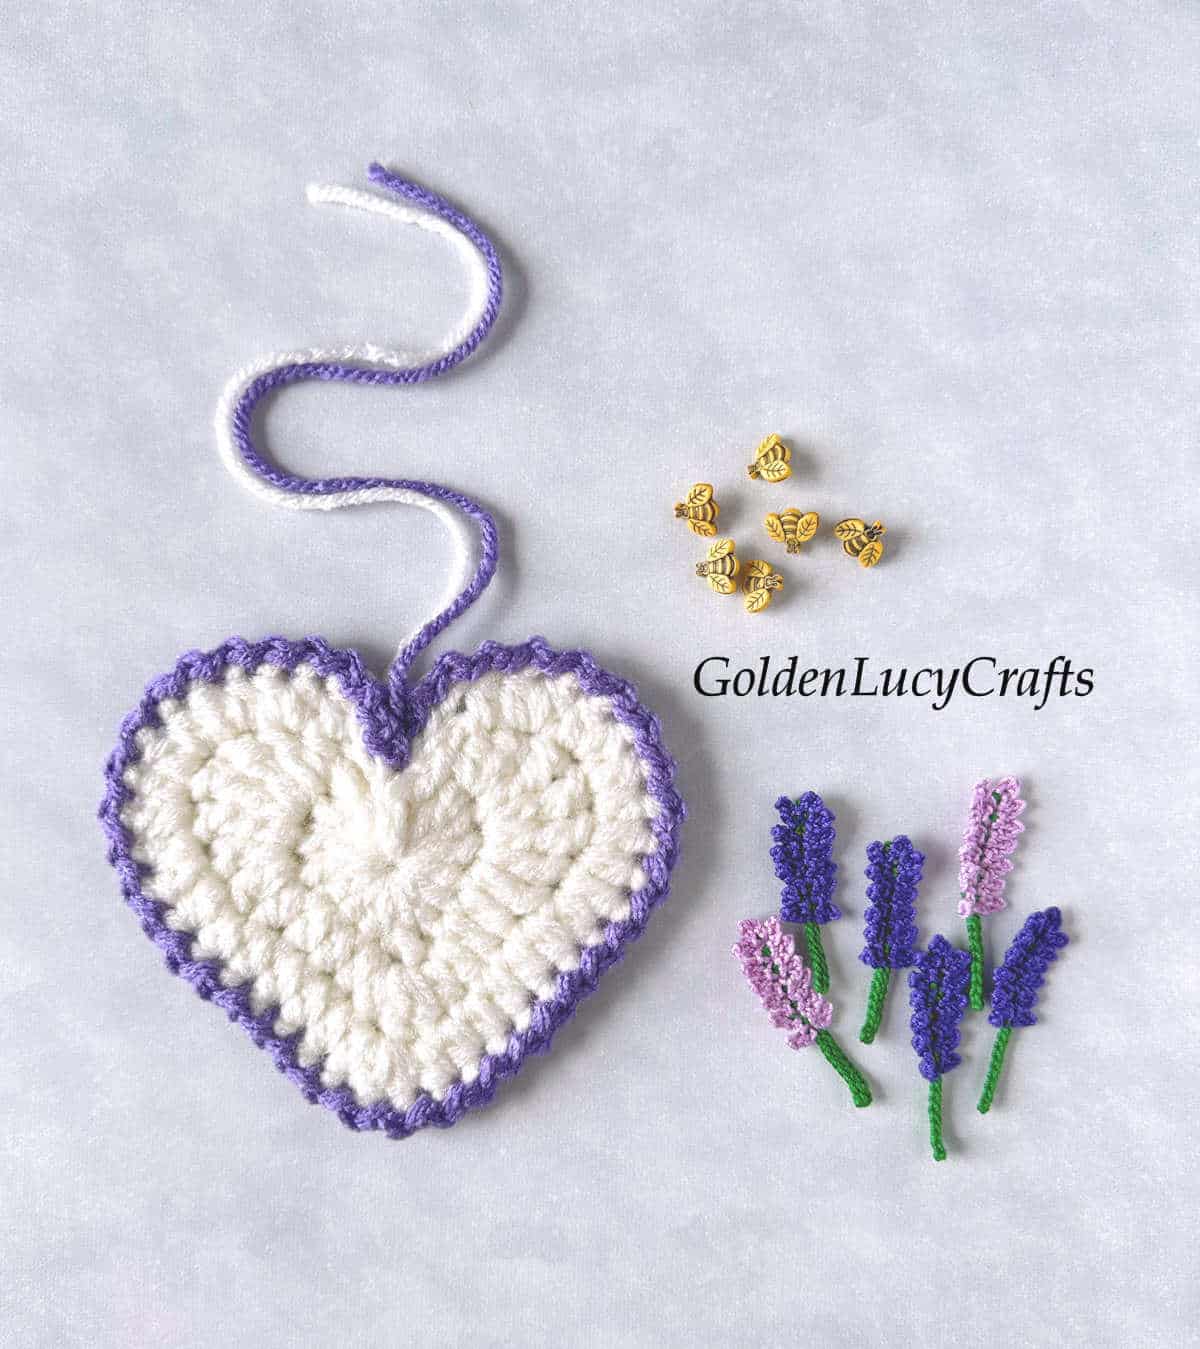 Crocheted heart in white color with purple edging, crochet lavender appliques and decorative bee buttons.